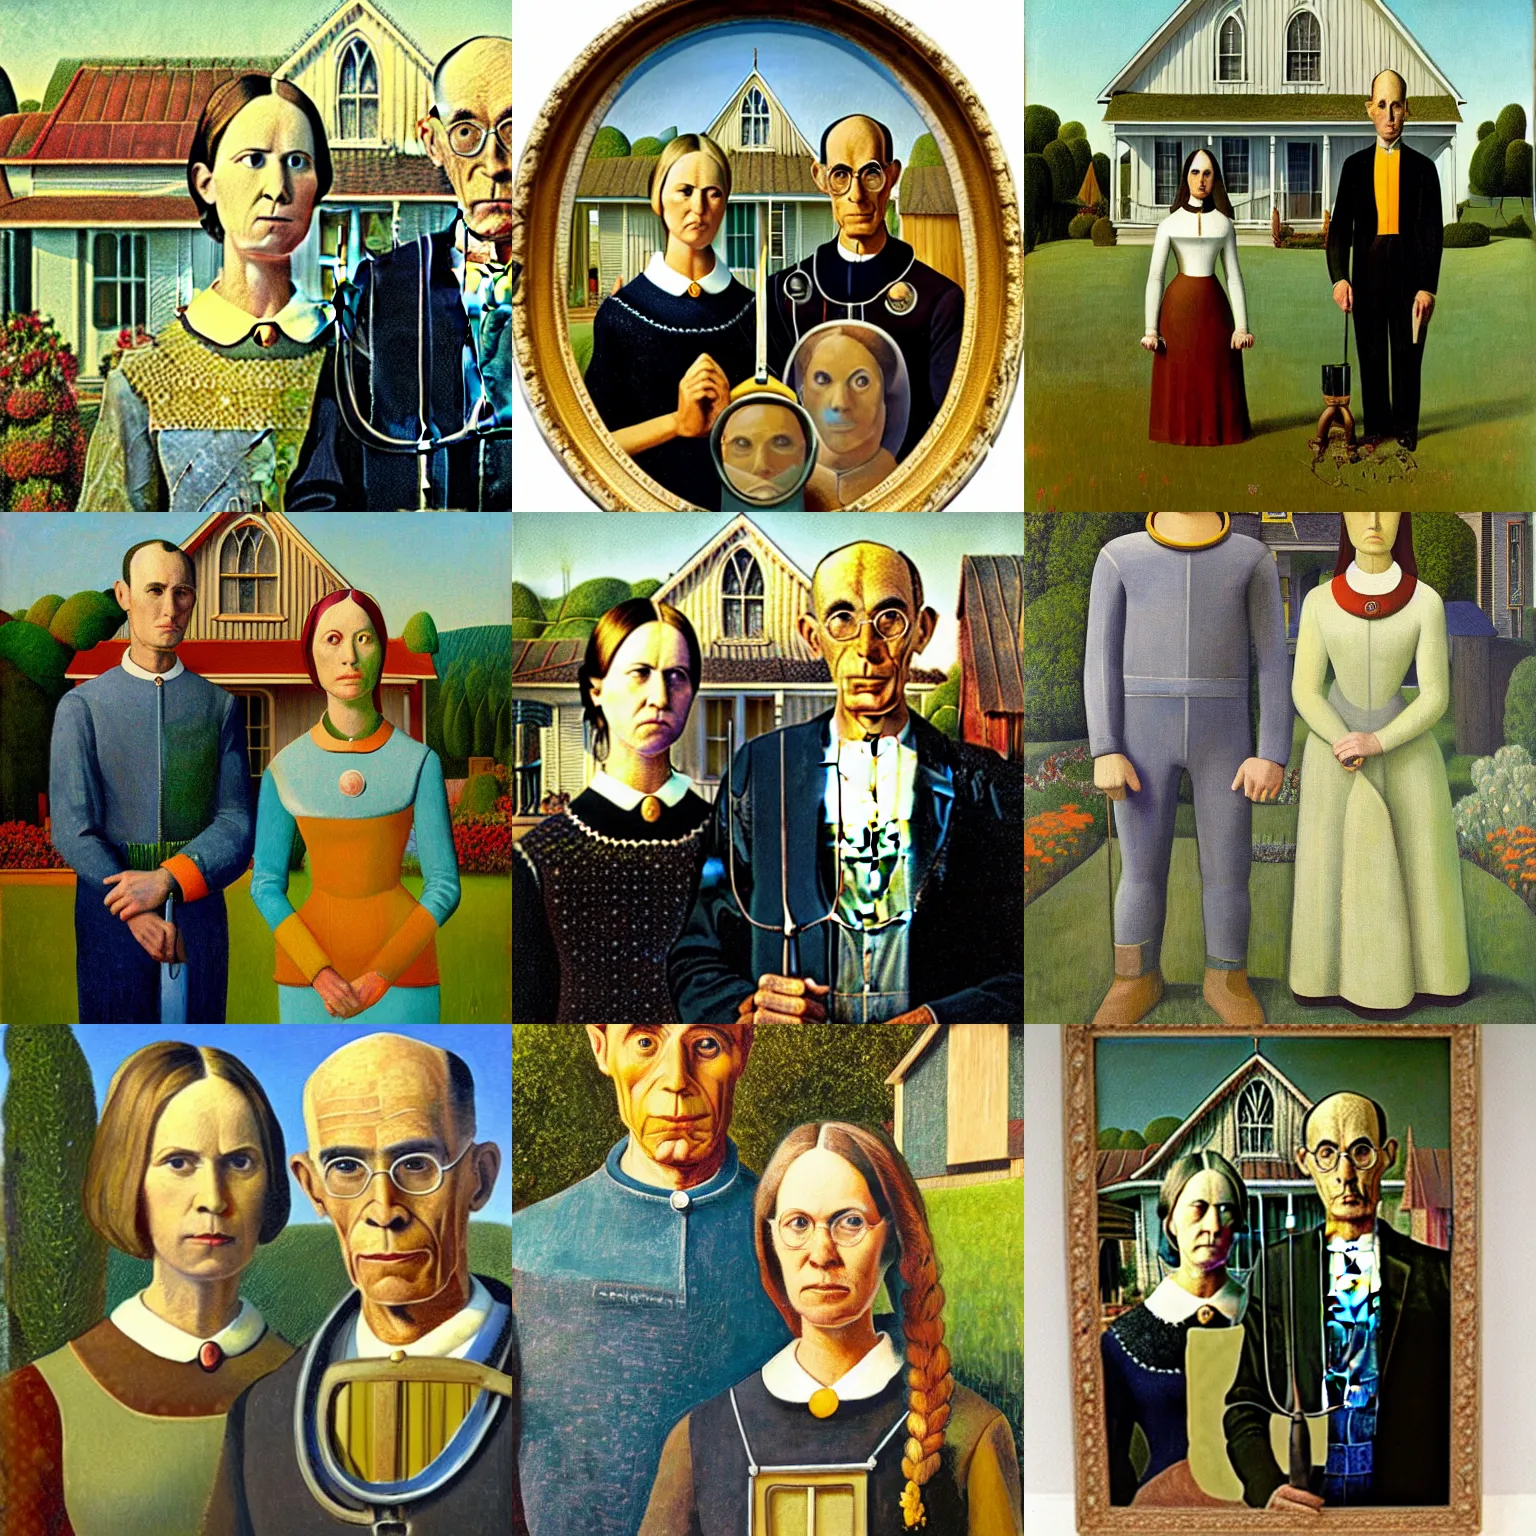 Prompt: a painting by grant wood of an astronaut couple in a garden in the style of american gothic